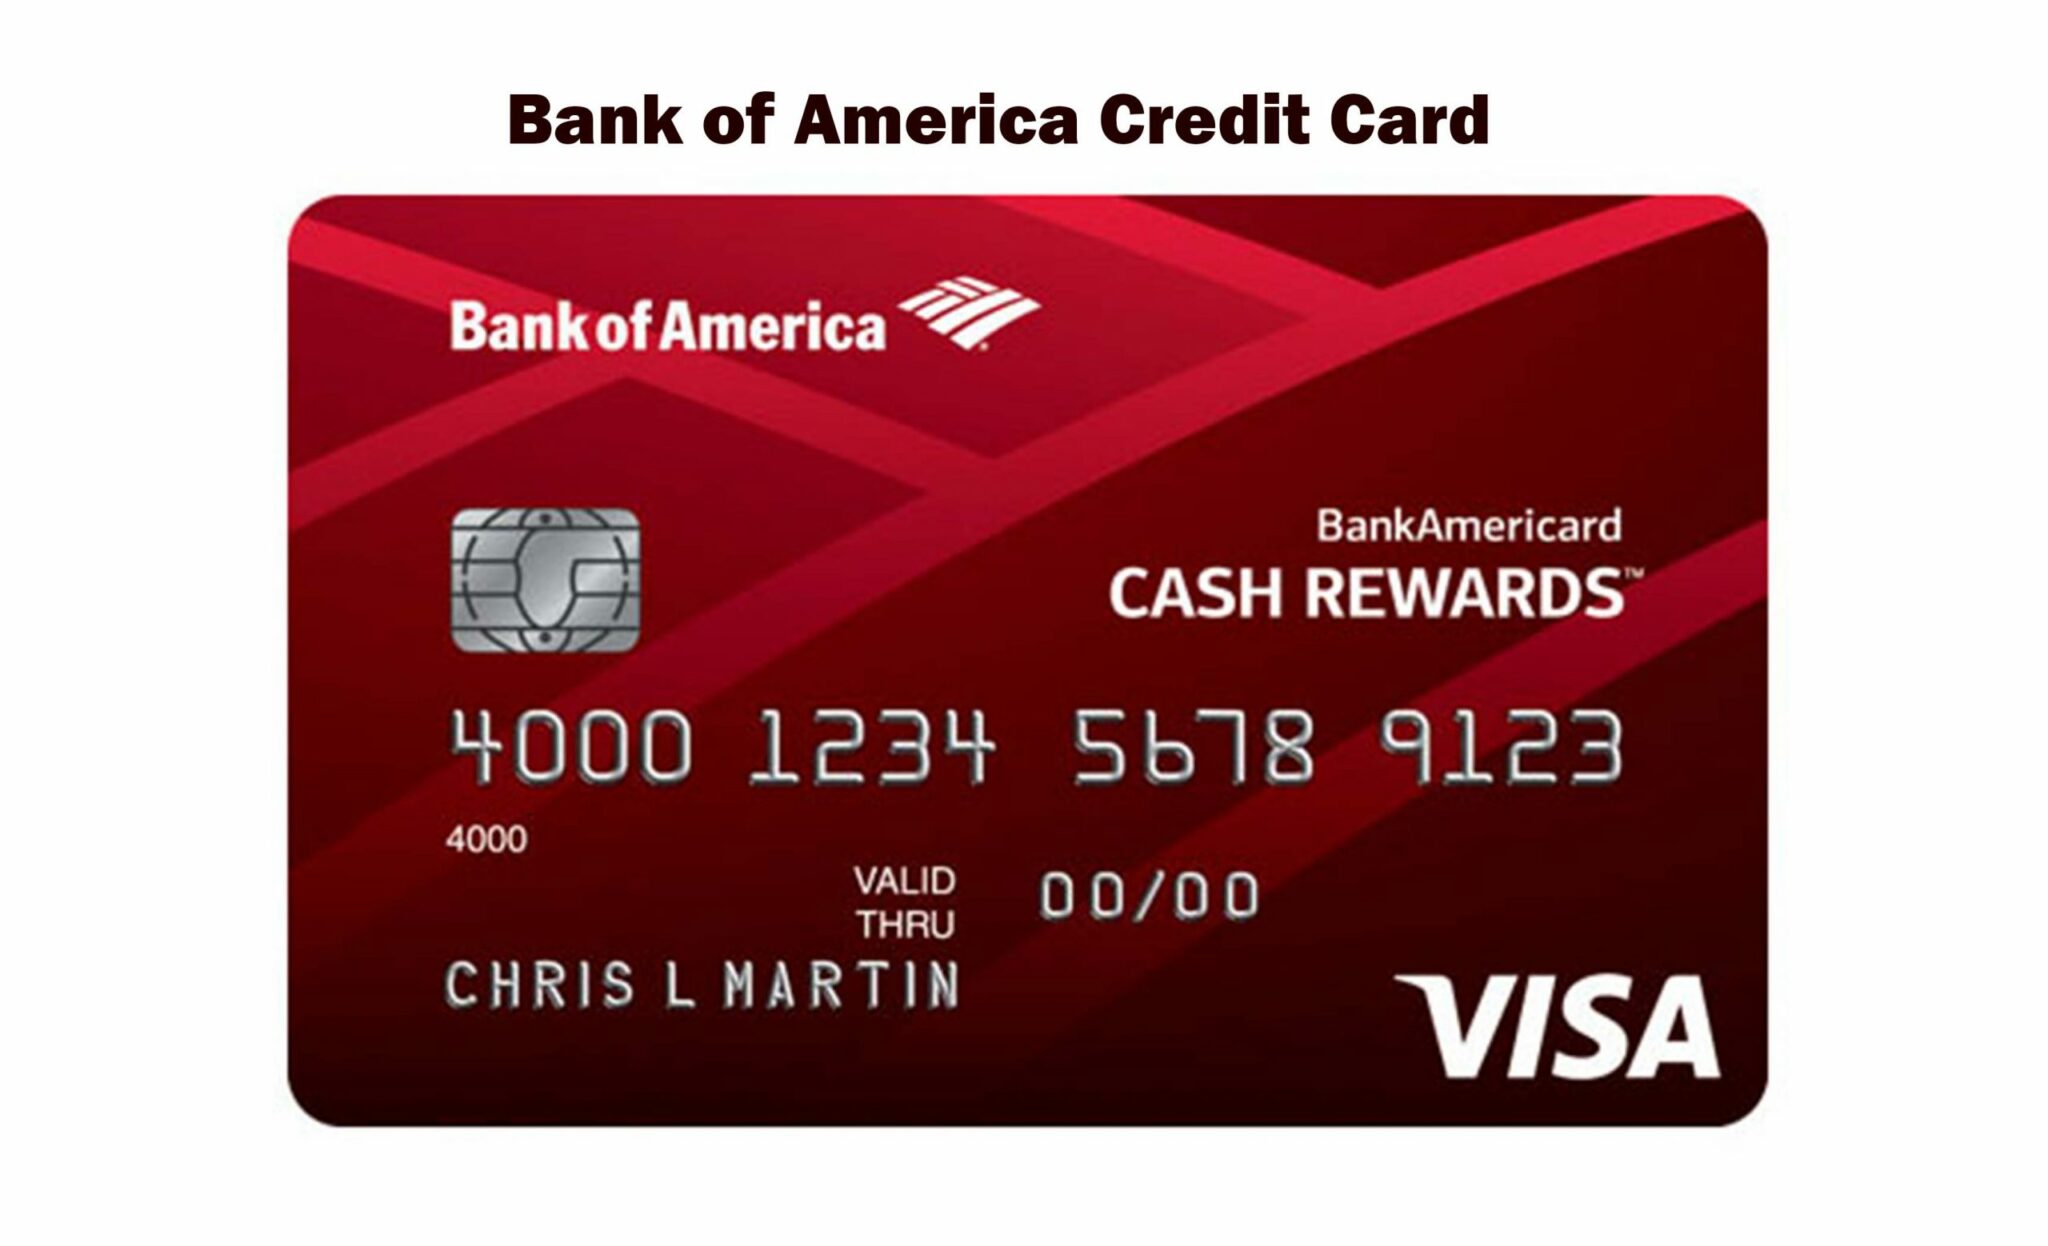 Bank of America Credit Card - How to Register